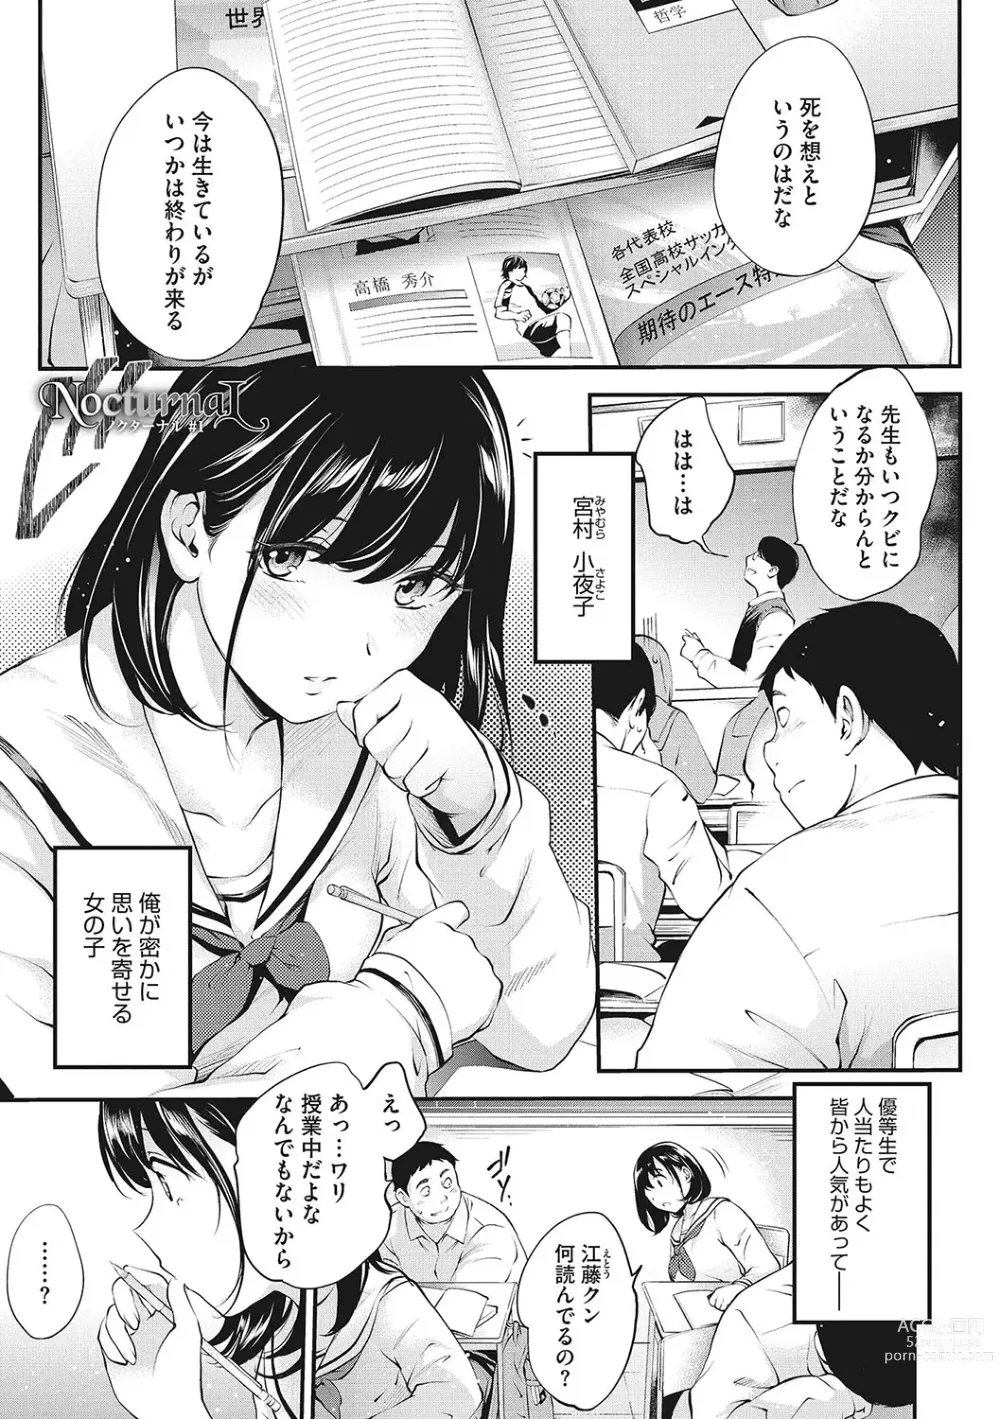 Page 4 of manga NocturnaL